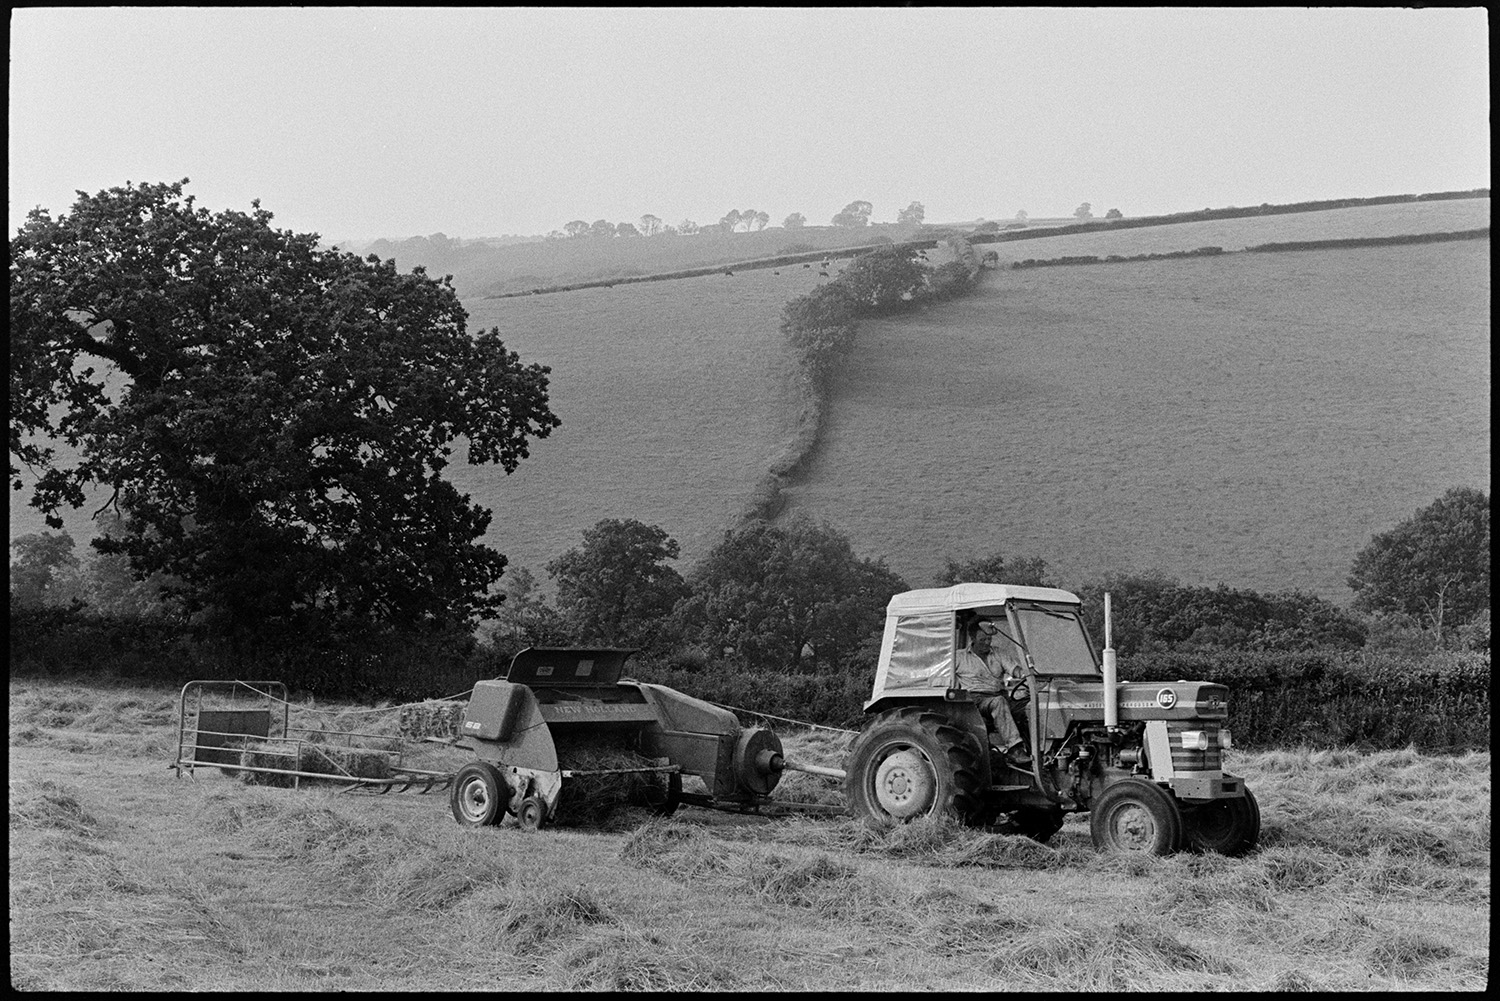 Farmers baling hay. 
[John Ward driving a tractor and baler in a field at Parsonage, Iddesleigh. Livestock can be seen grazing on a hilly field in the background.]